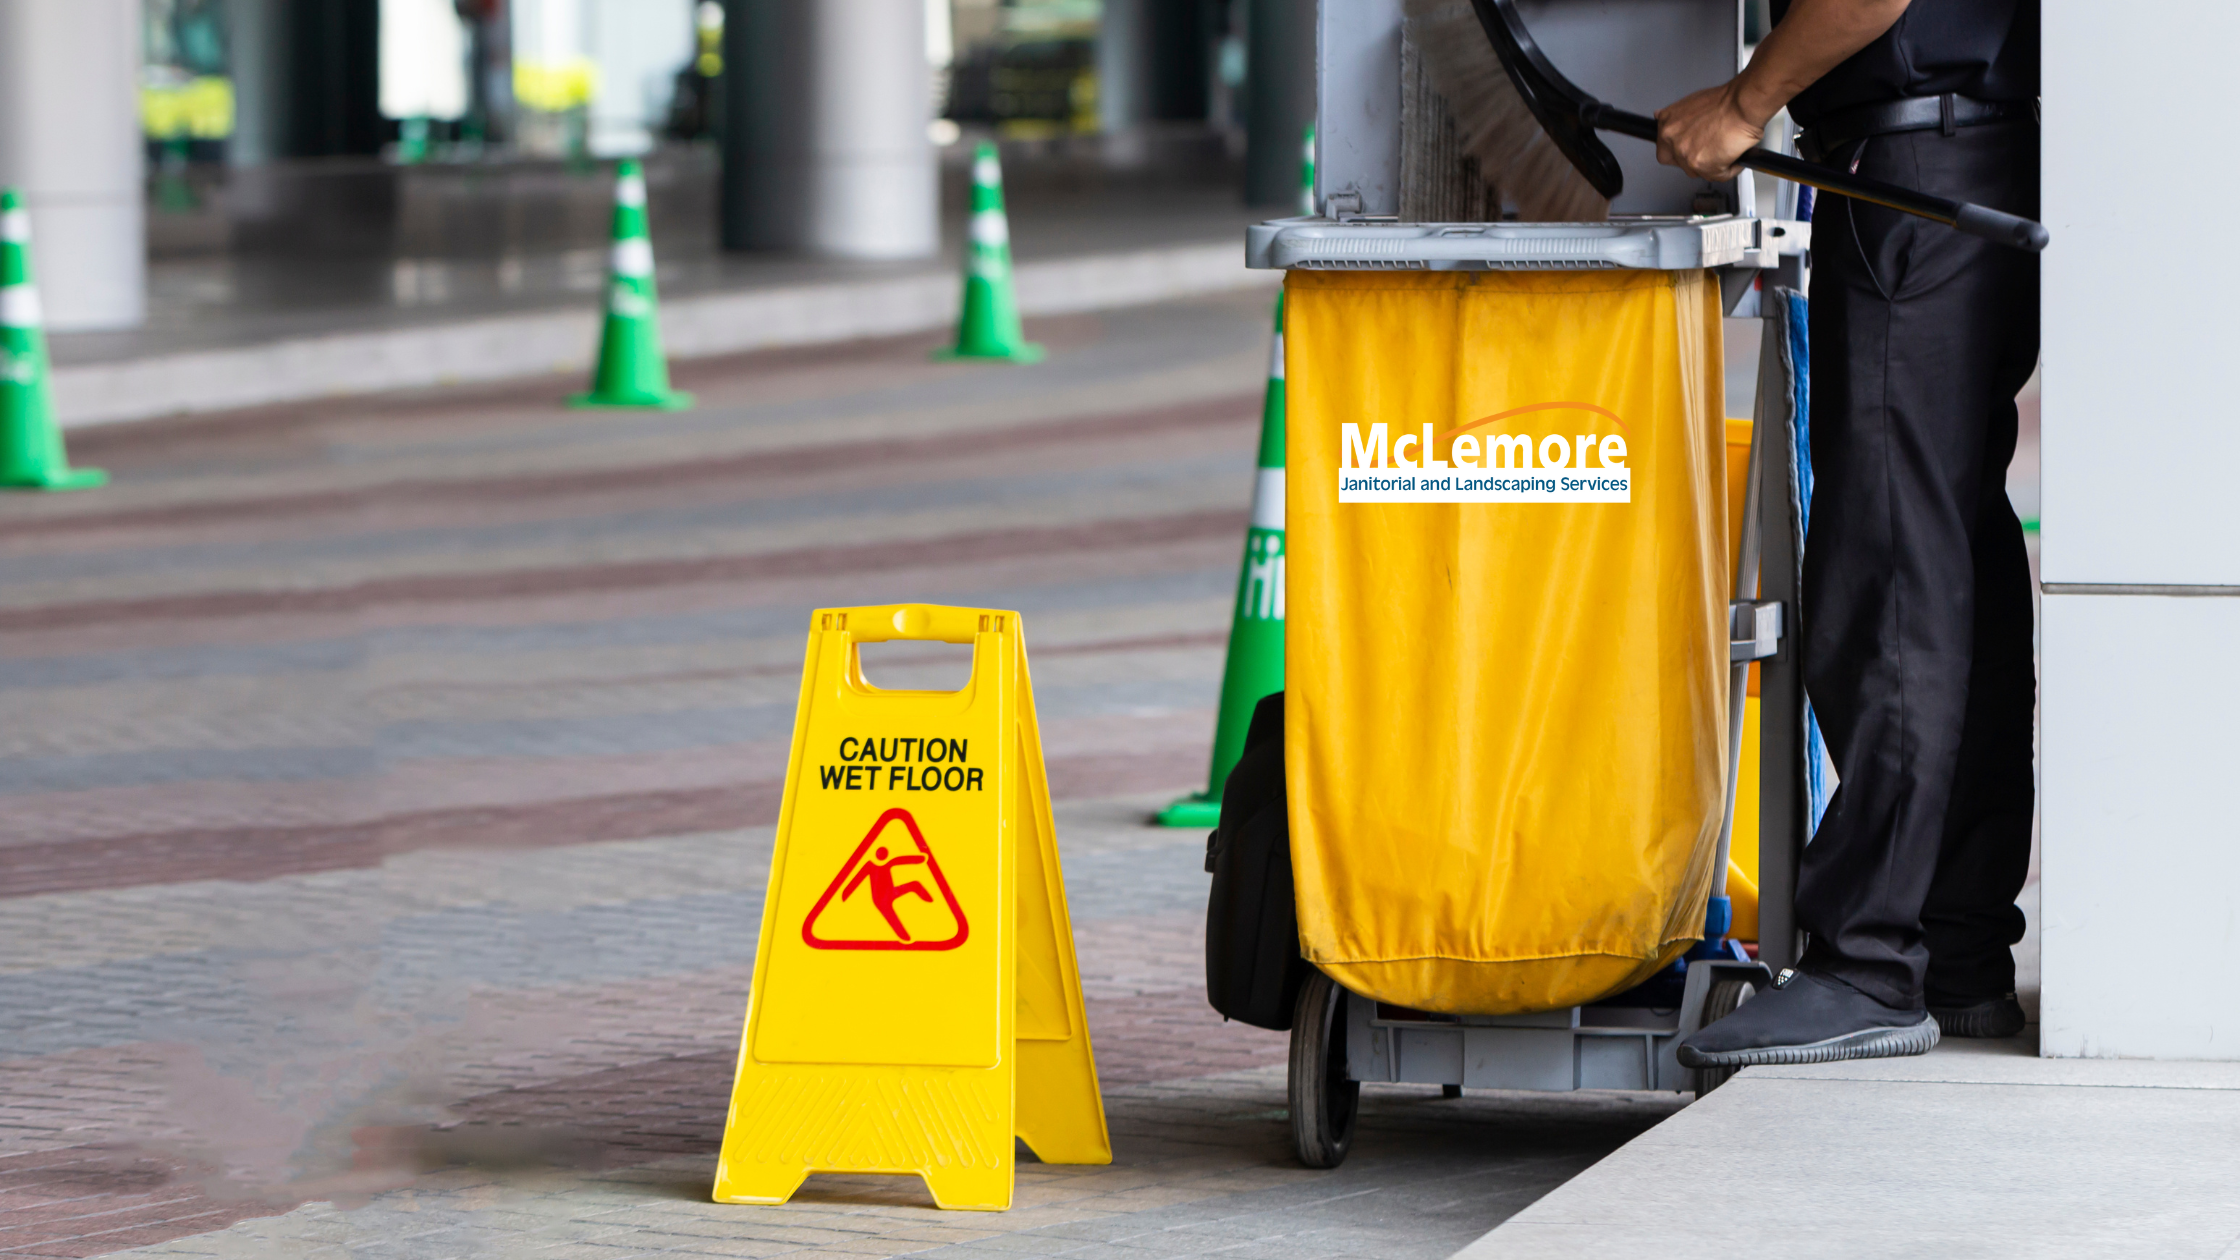 wet floor sign and trashcan